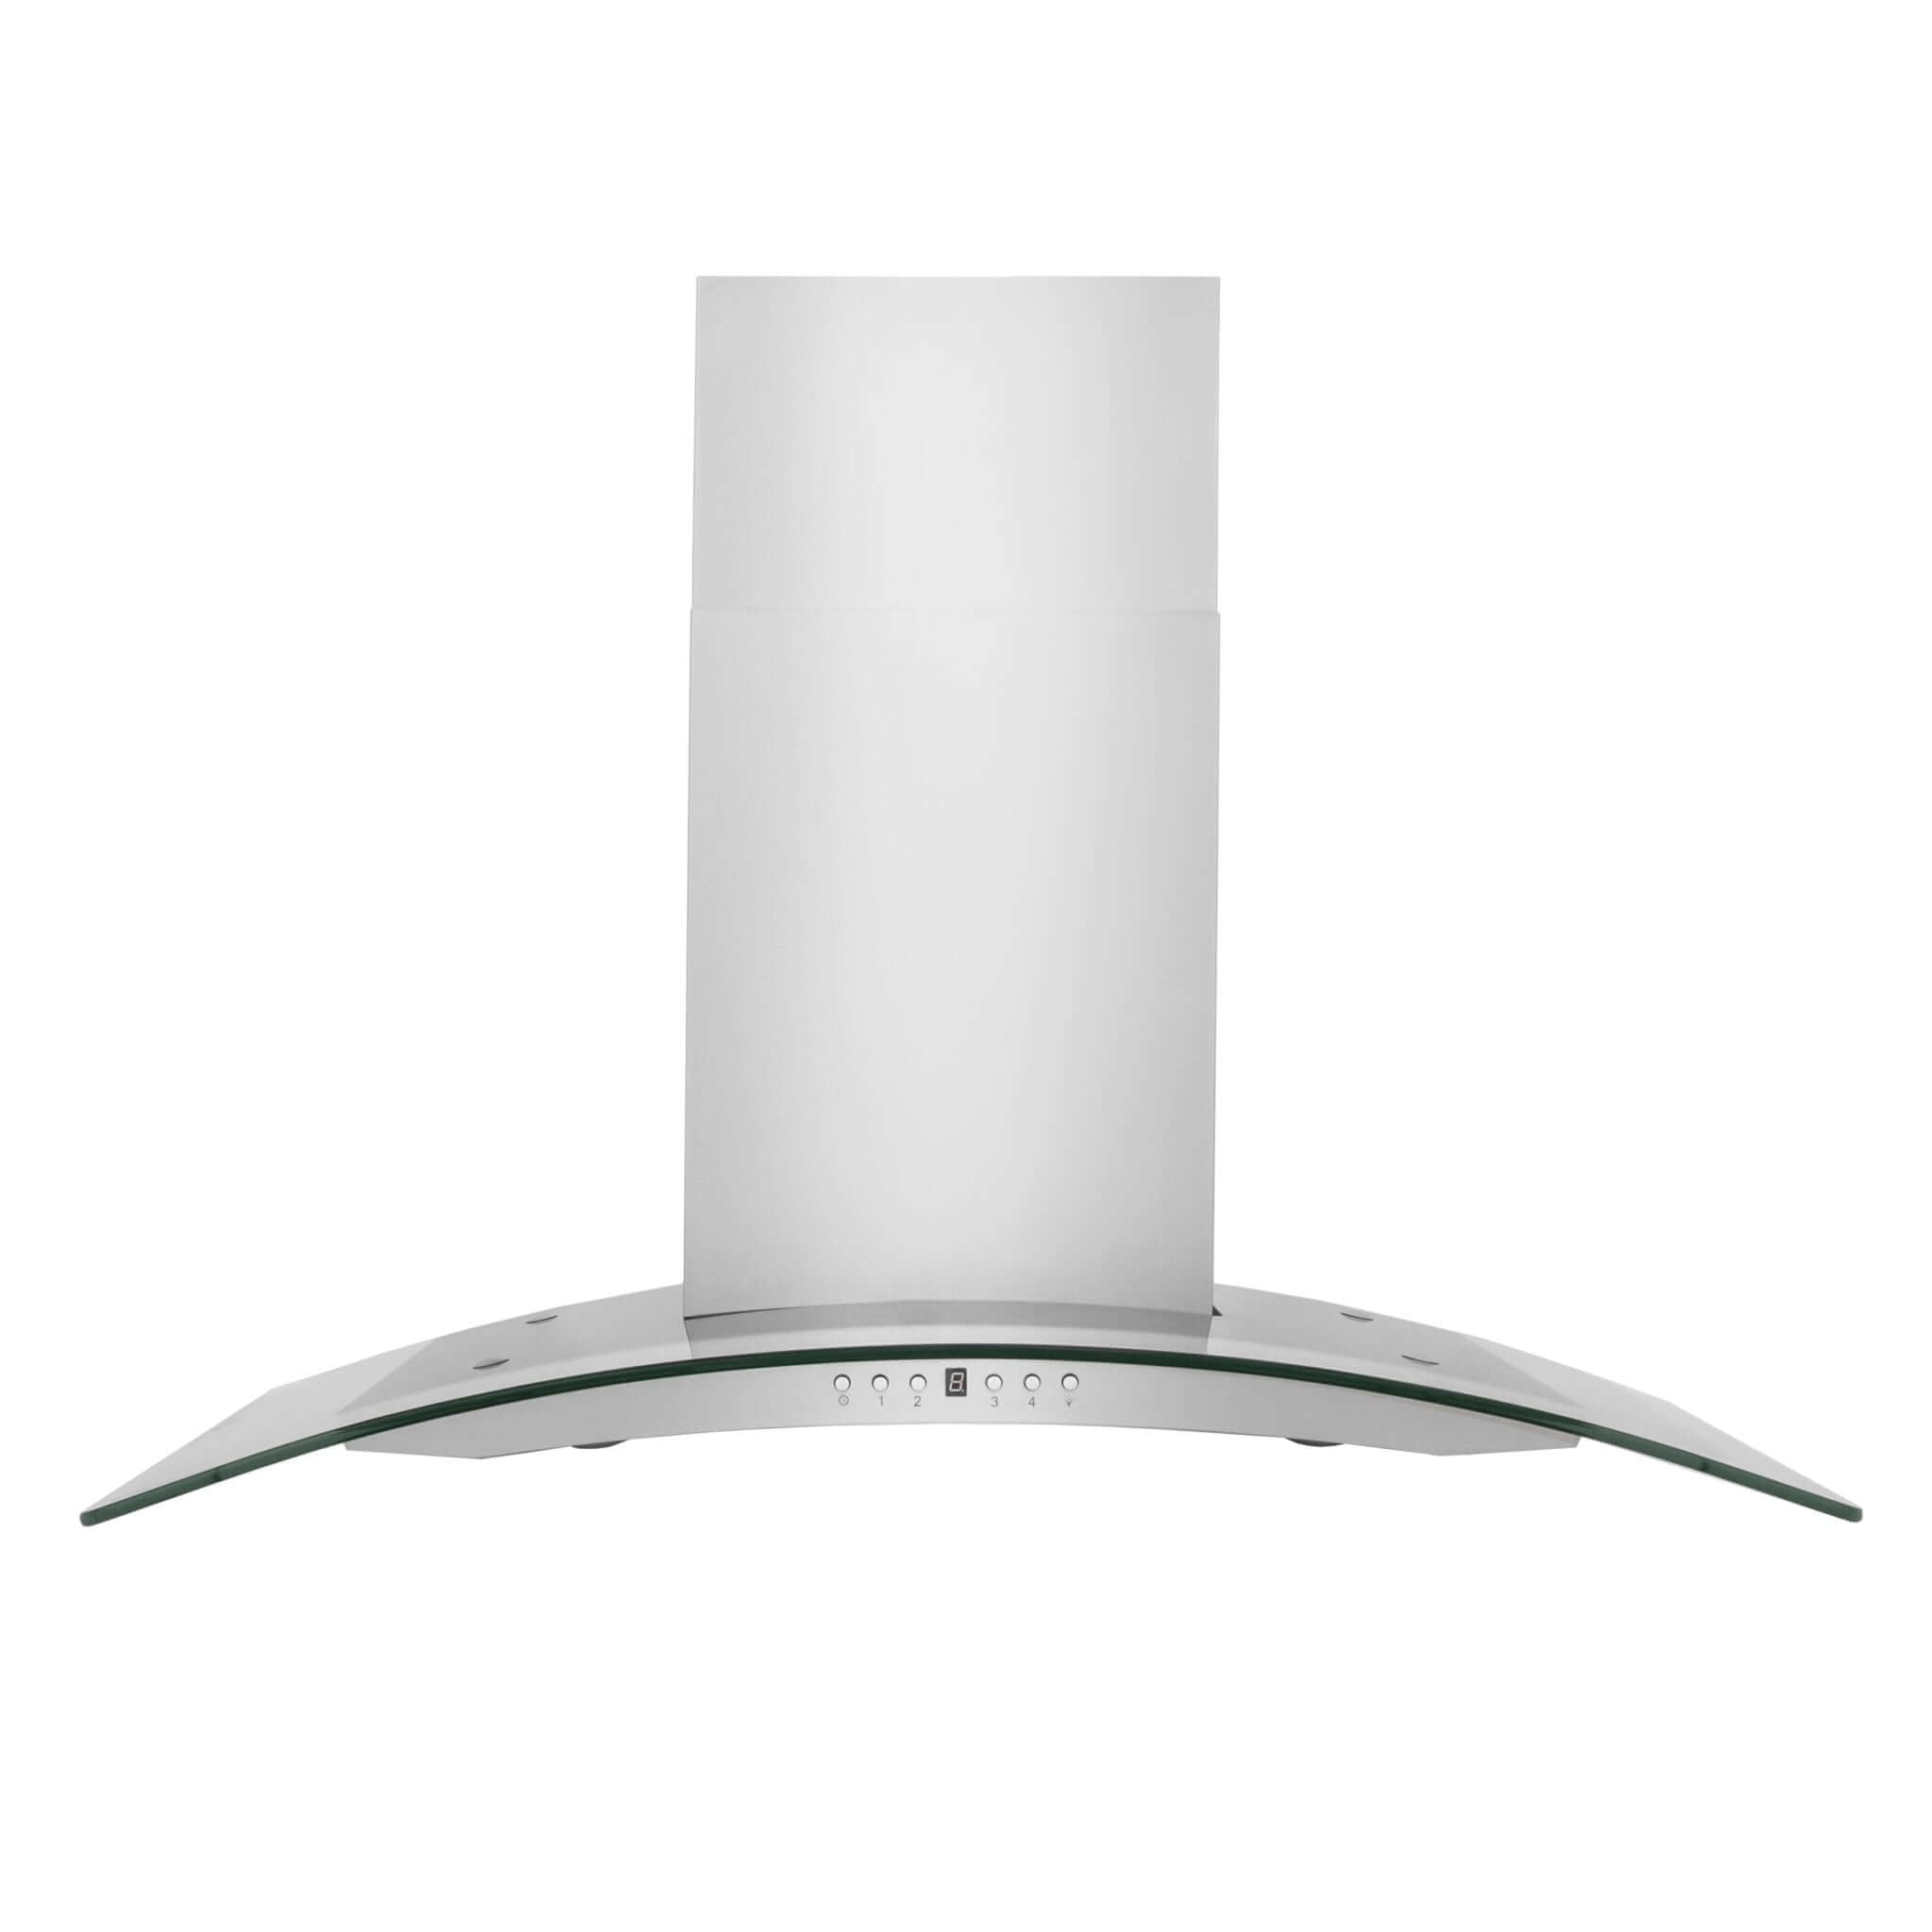 ZLINE Convertible Vent Wall Mount Range Hood in Stainless Steel & Glass (KN4) Front View